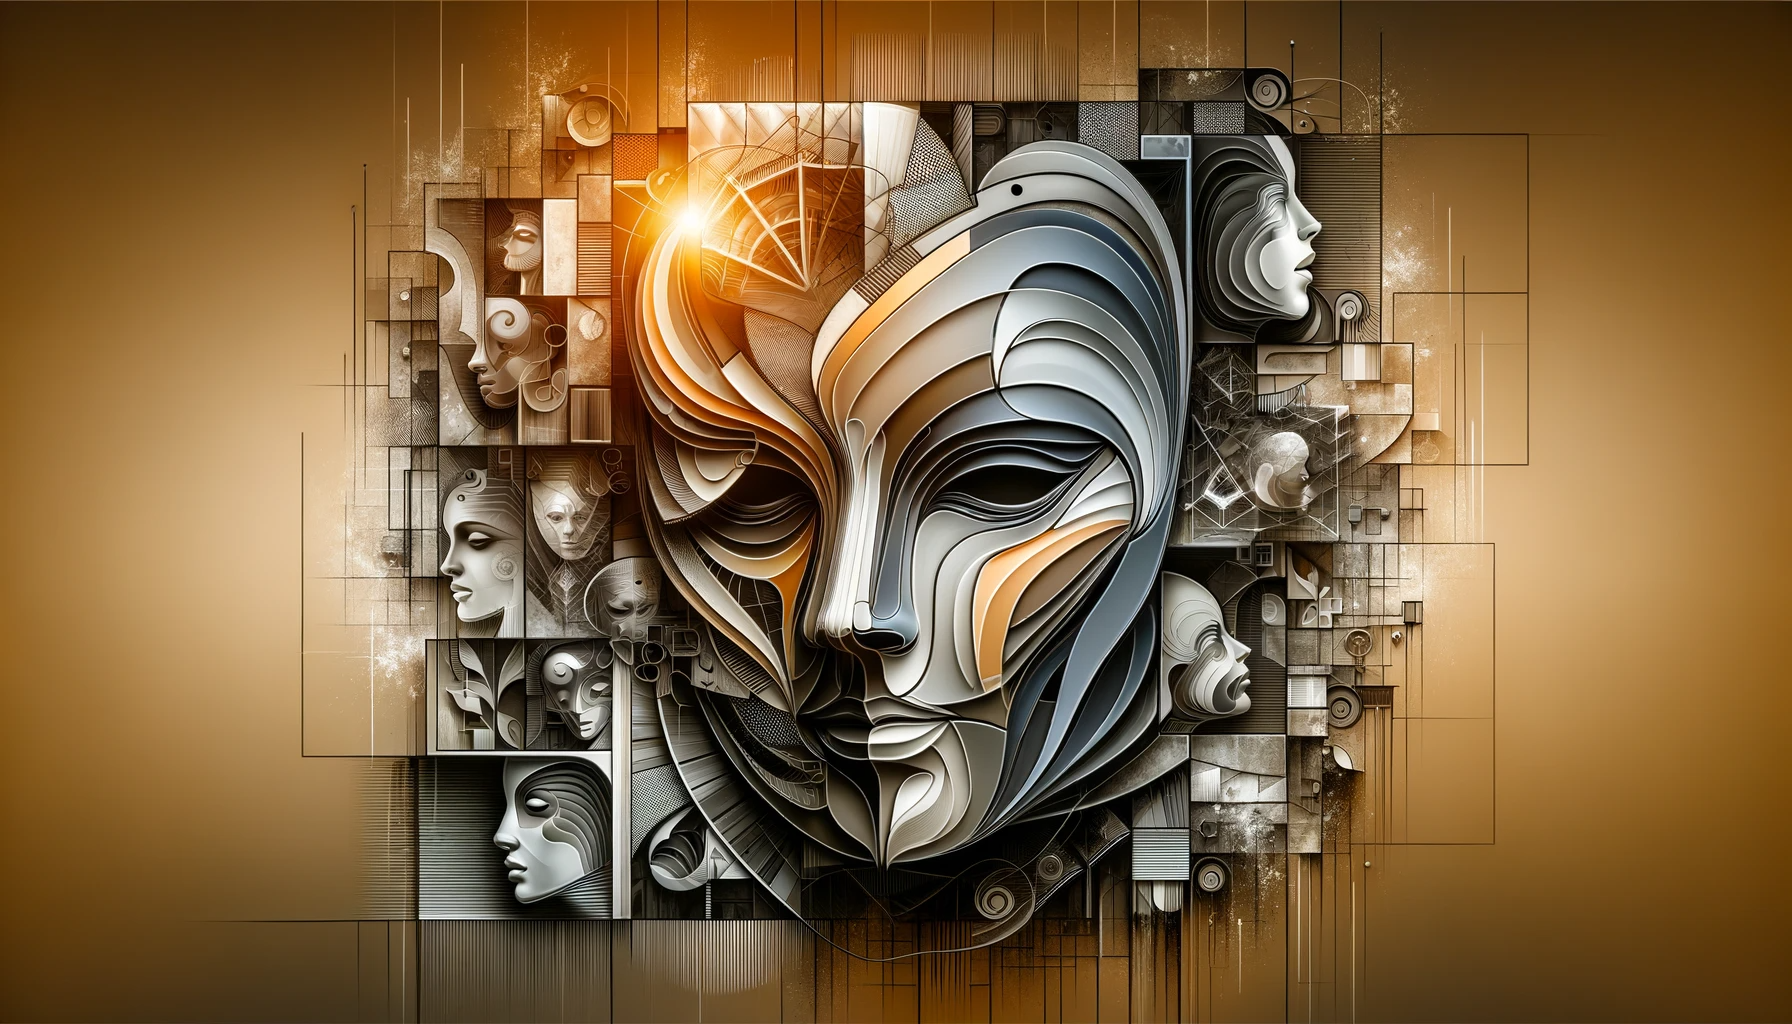 Abstract images on the theme 'Psychology of Deception', Wikonian in gray tones. The painting symbolically depicts masks, shadows and mirrors, which represent the truth and face of human behavior. The composition is arranged in such a way that you can think about the subtle and elusive nature of deception and its psychological aspects